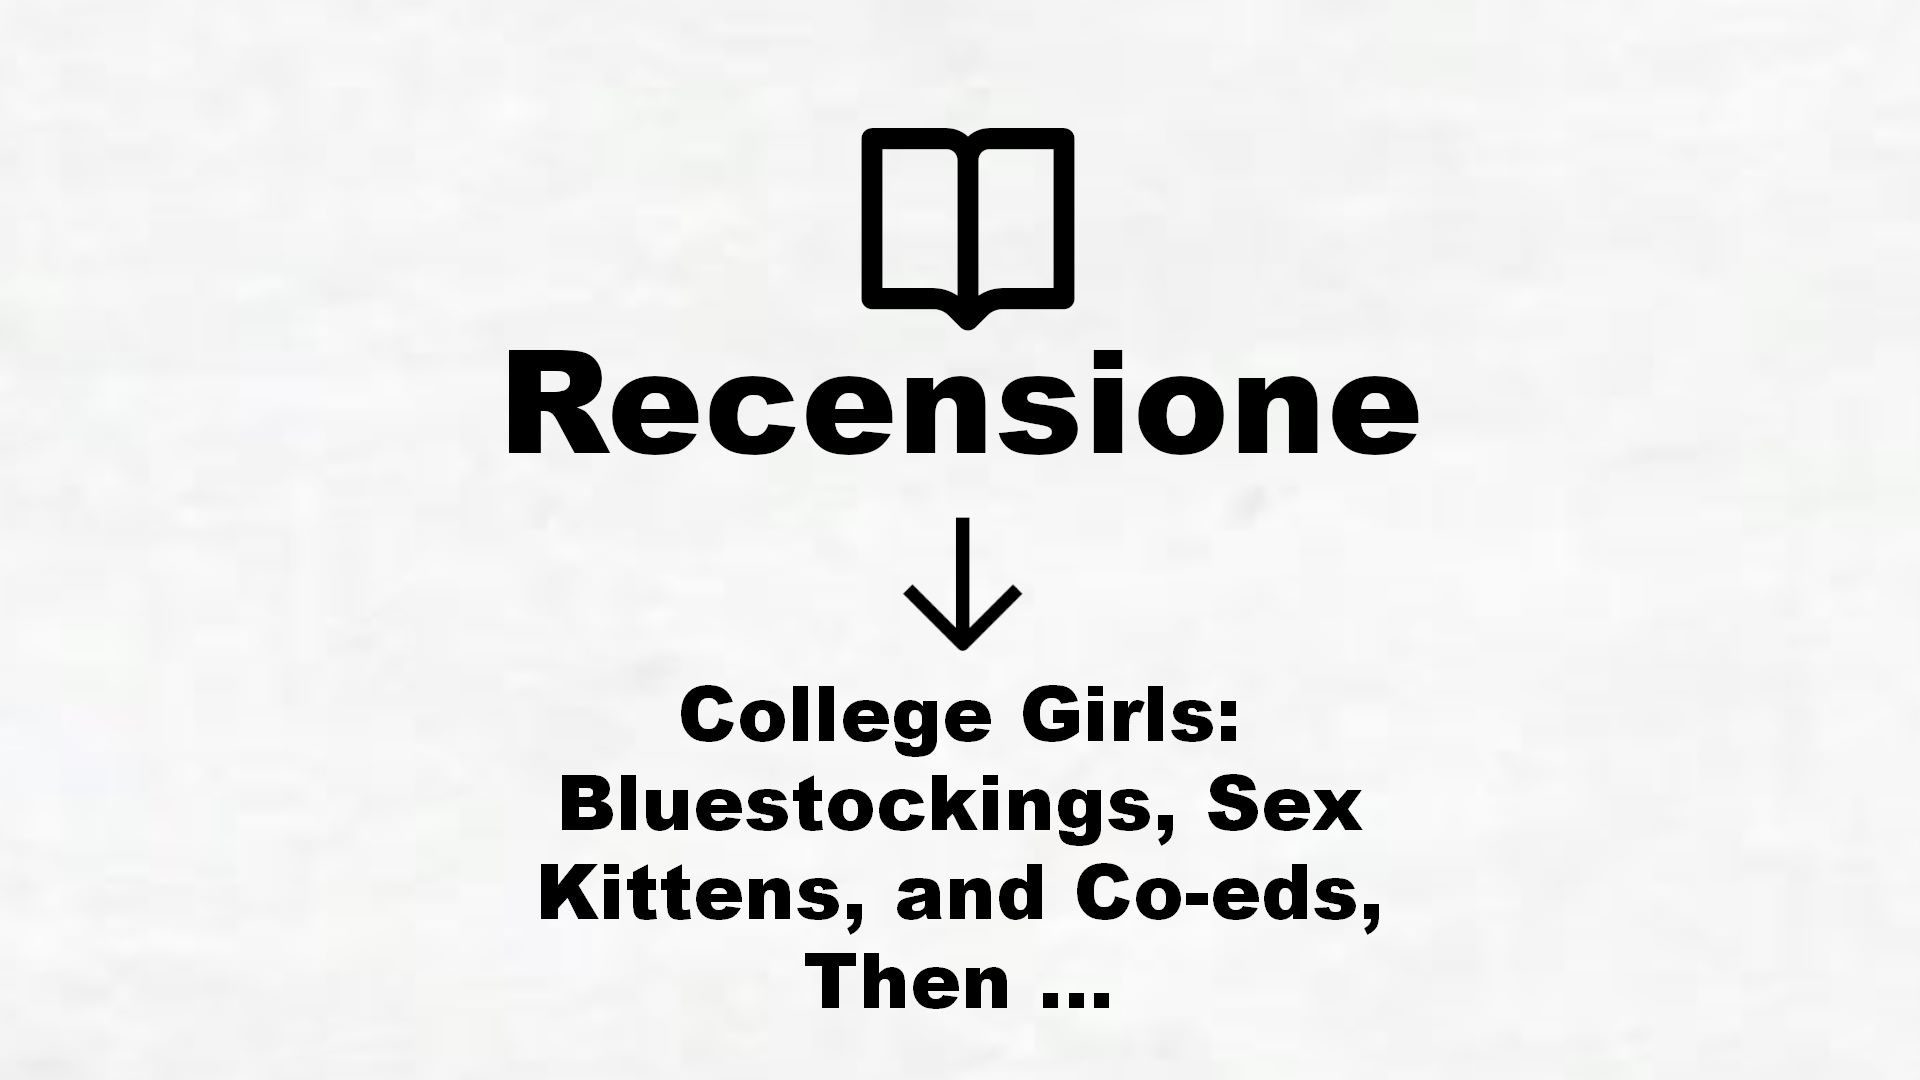 College Girls: Bluestockings, Sex Kittens, and Co-eds, Then and Now (English Edition) – Recensione Libro